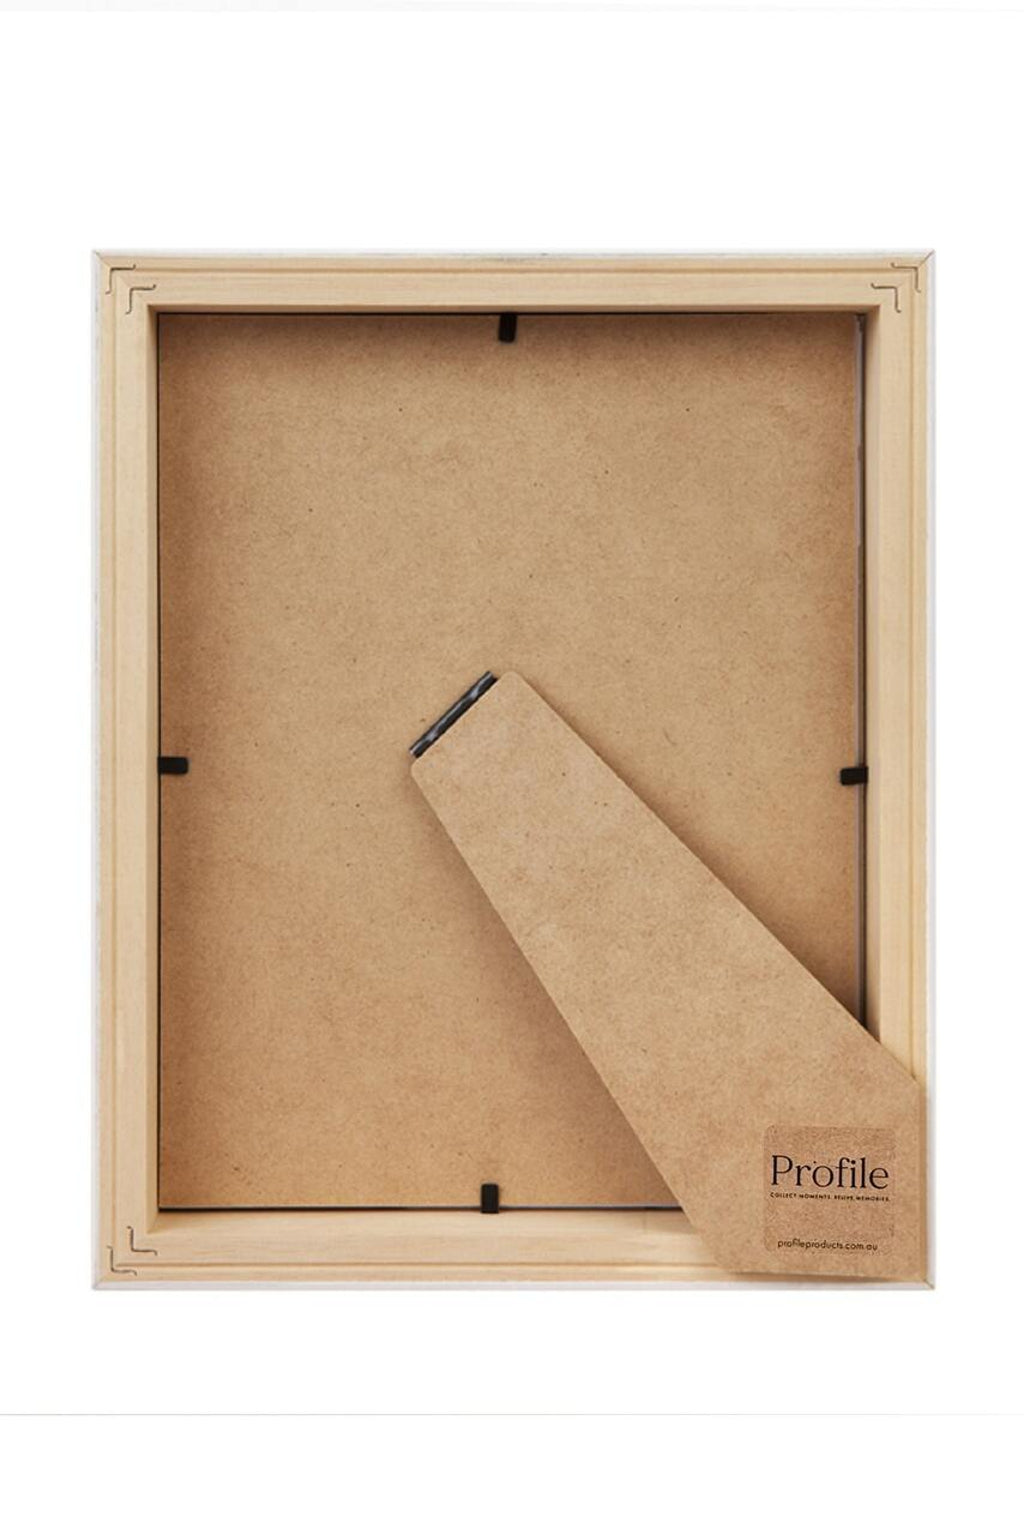 Gallery Box Victorian Ash Natural Oak Timber Photo Frame from our Australian Made Picture Frames collection by Profile Products Australia